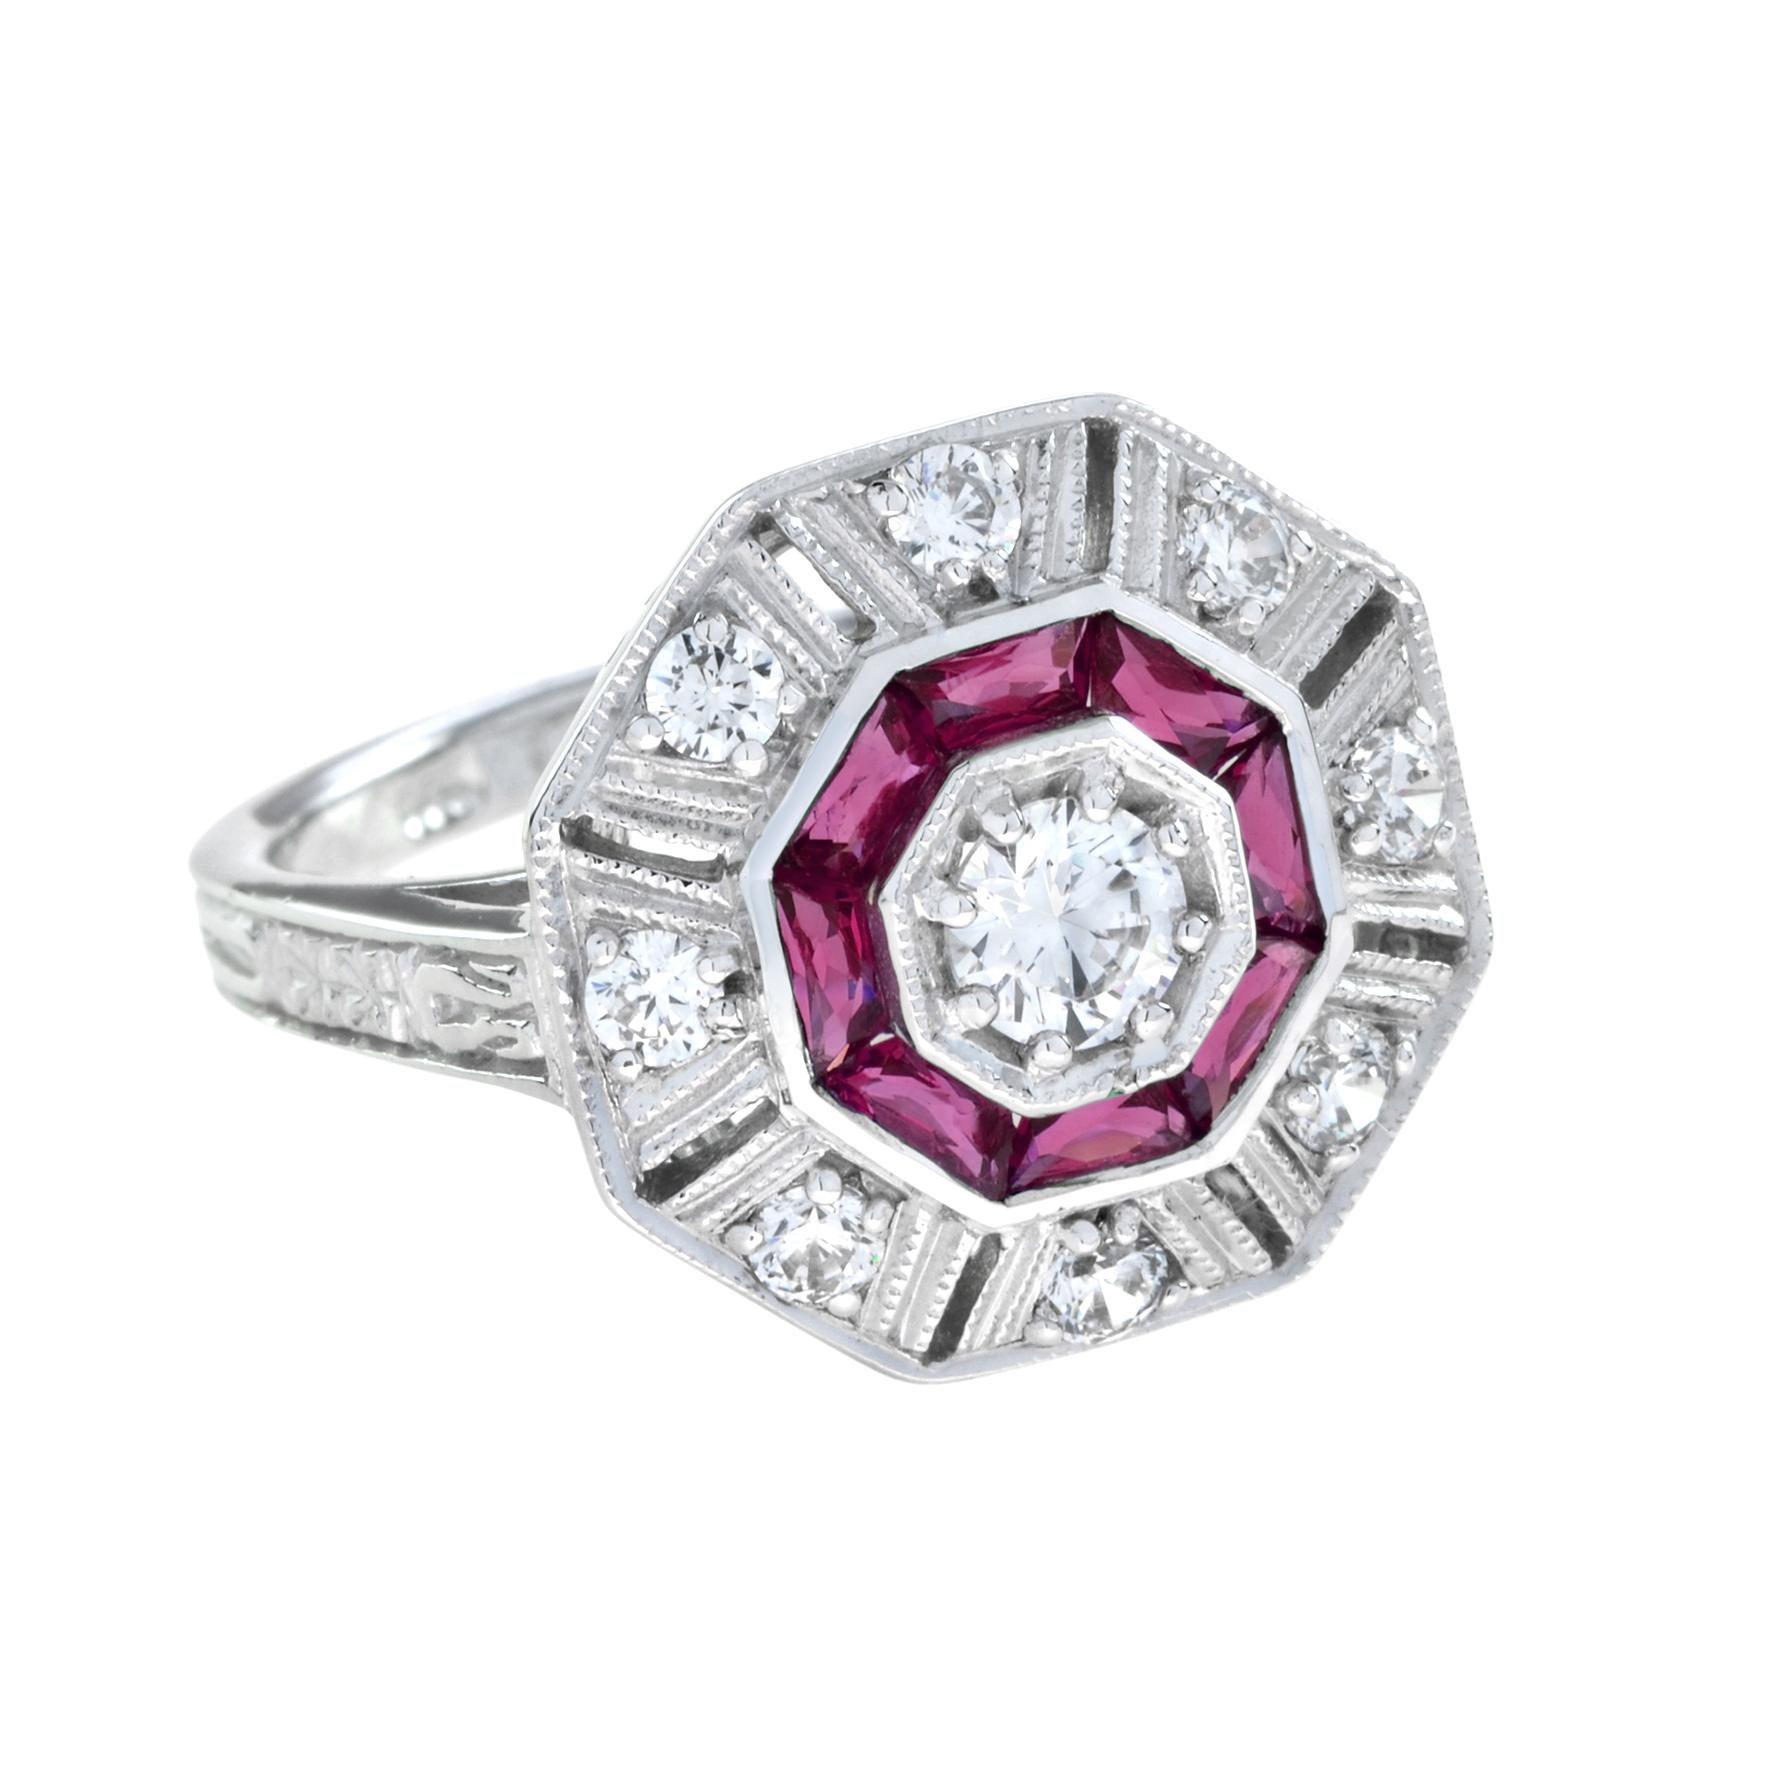 For Sale:  Diamond and Ruby Art Deco Style Octagon Target Ring in 18K White Gold 2